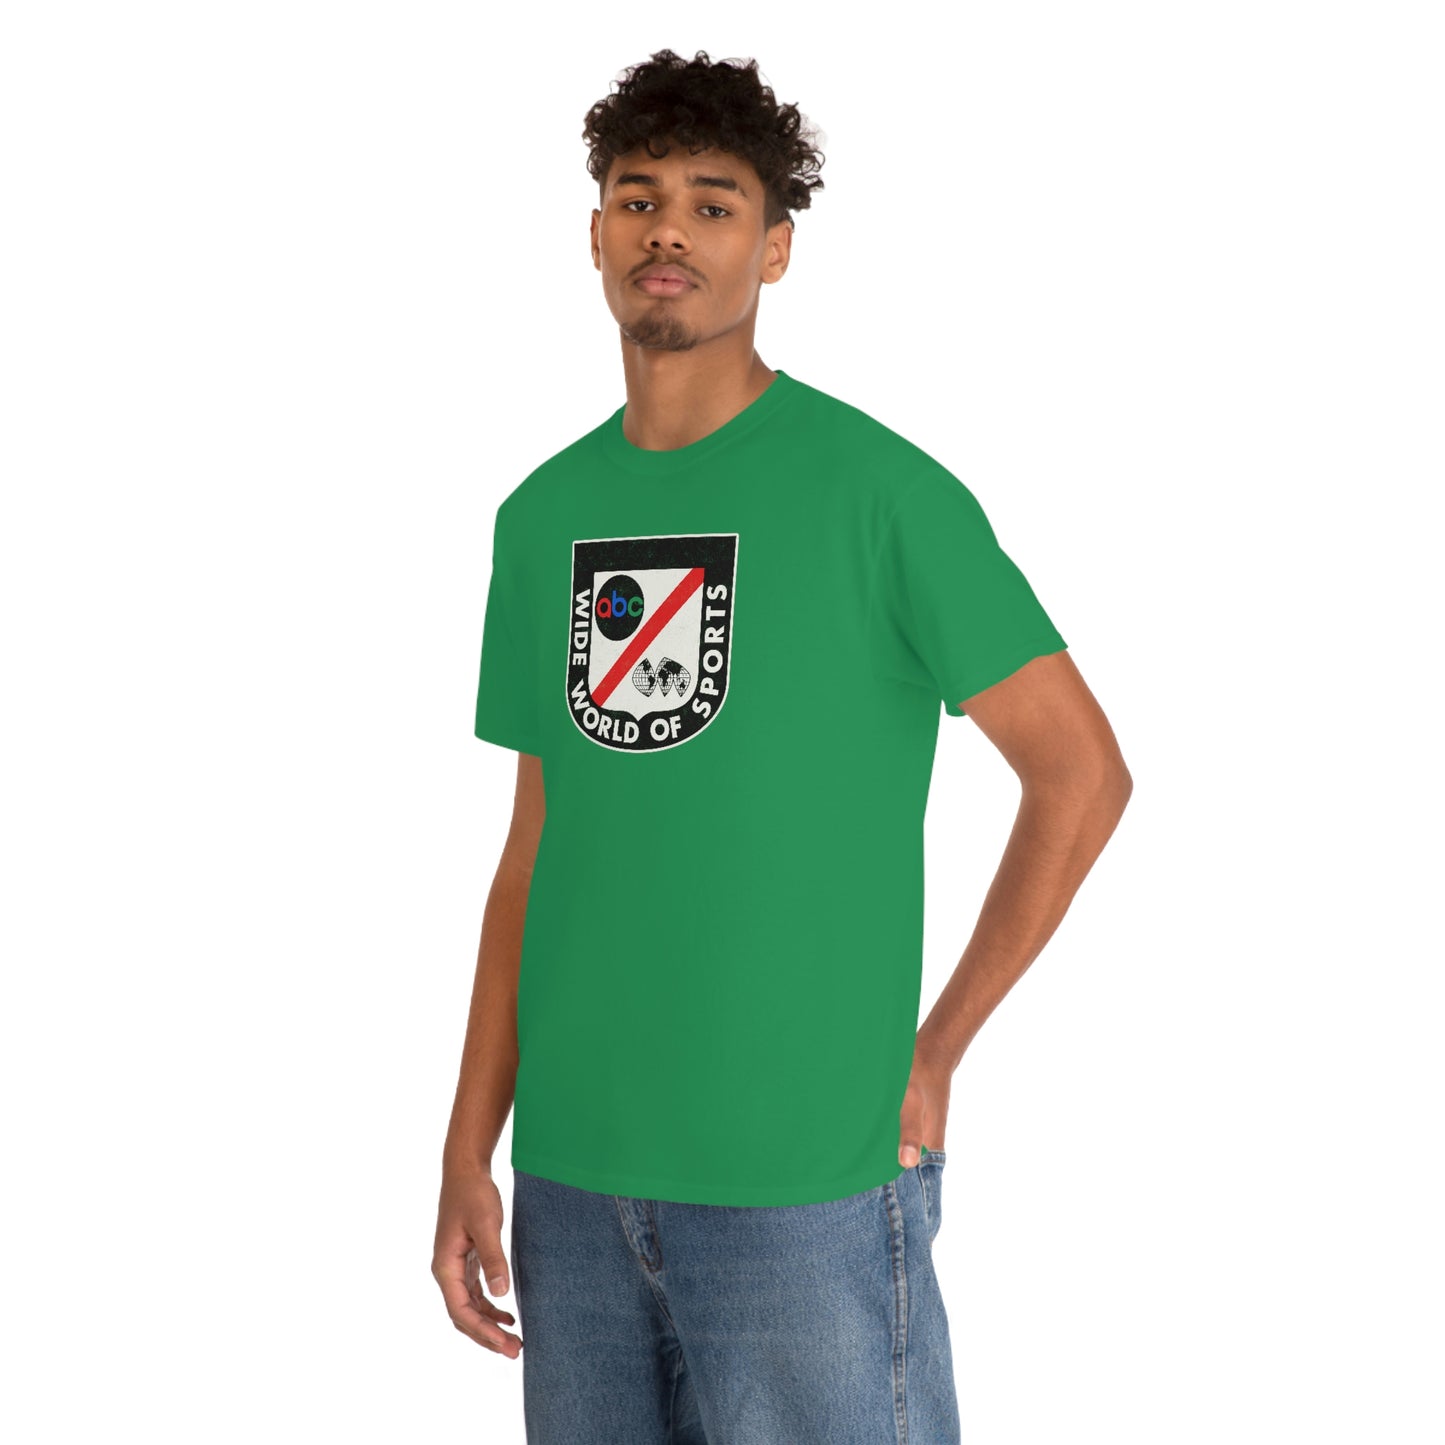 Wide World of Sports T-Shirt